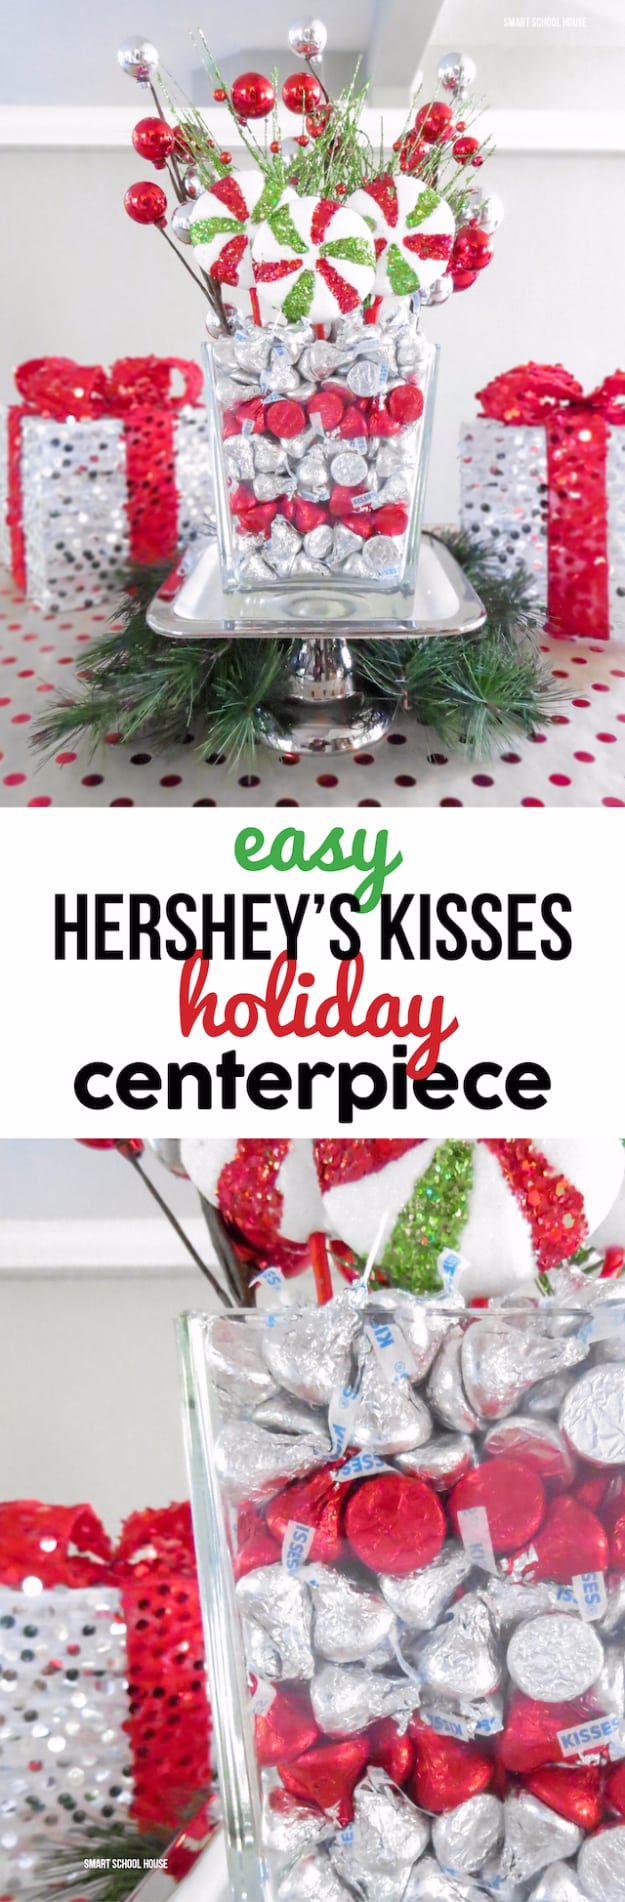 DIY Christmas Centerpieces - Easy Hershey's Kisses Holiday Centerpiece - Simple, Easy Holiday Decorating Ideas on A Budget- cheap dollar store crafts holiday #holiday #crafts #christmas